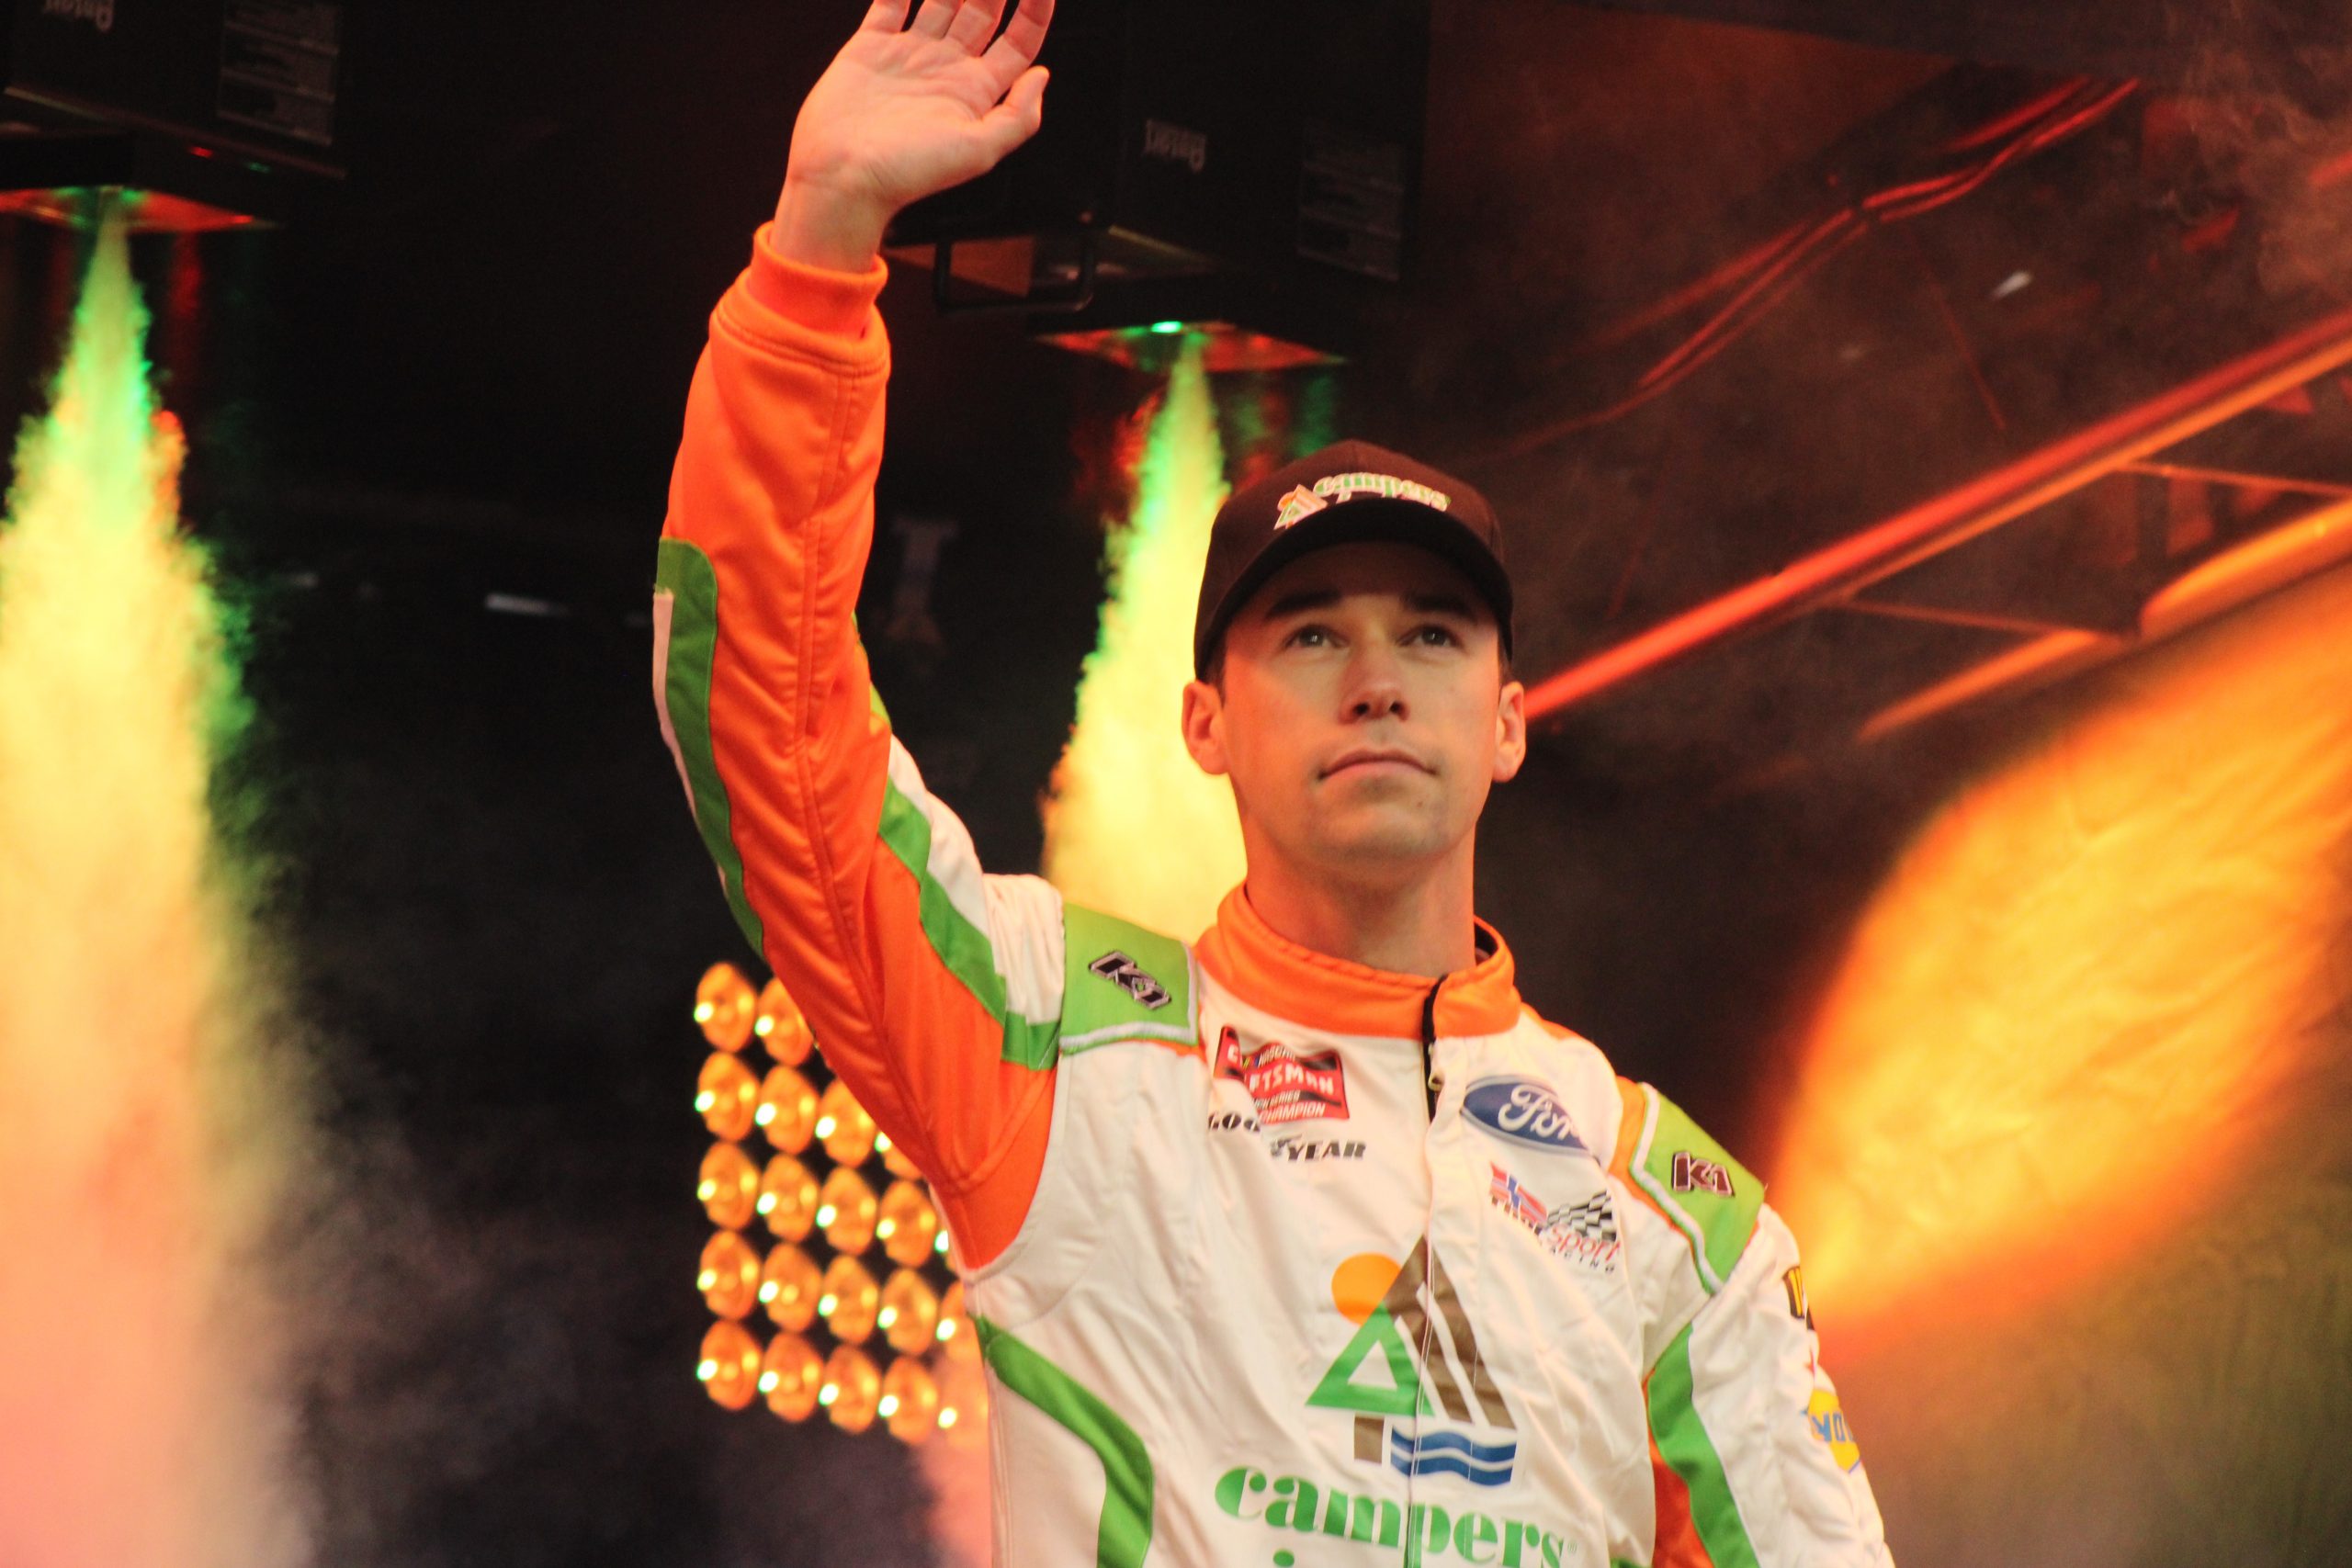 Ben Rhodes had a rather challenging time in Saturday night's WEATHER GUARD Truck Race on Dirt at Bristol. (Photo: Trish McCormack | The Podium Finish)